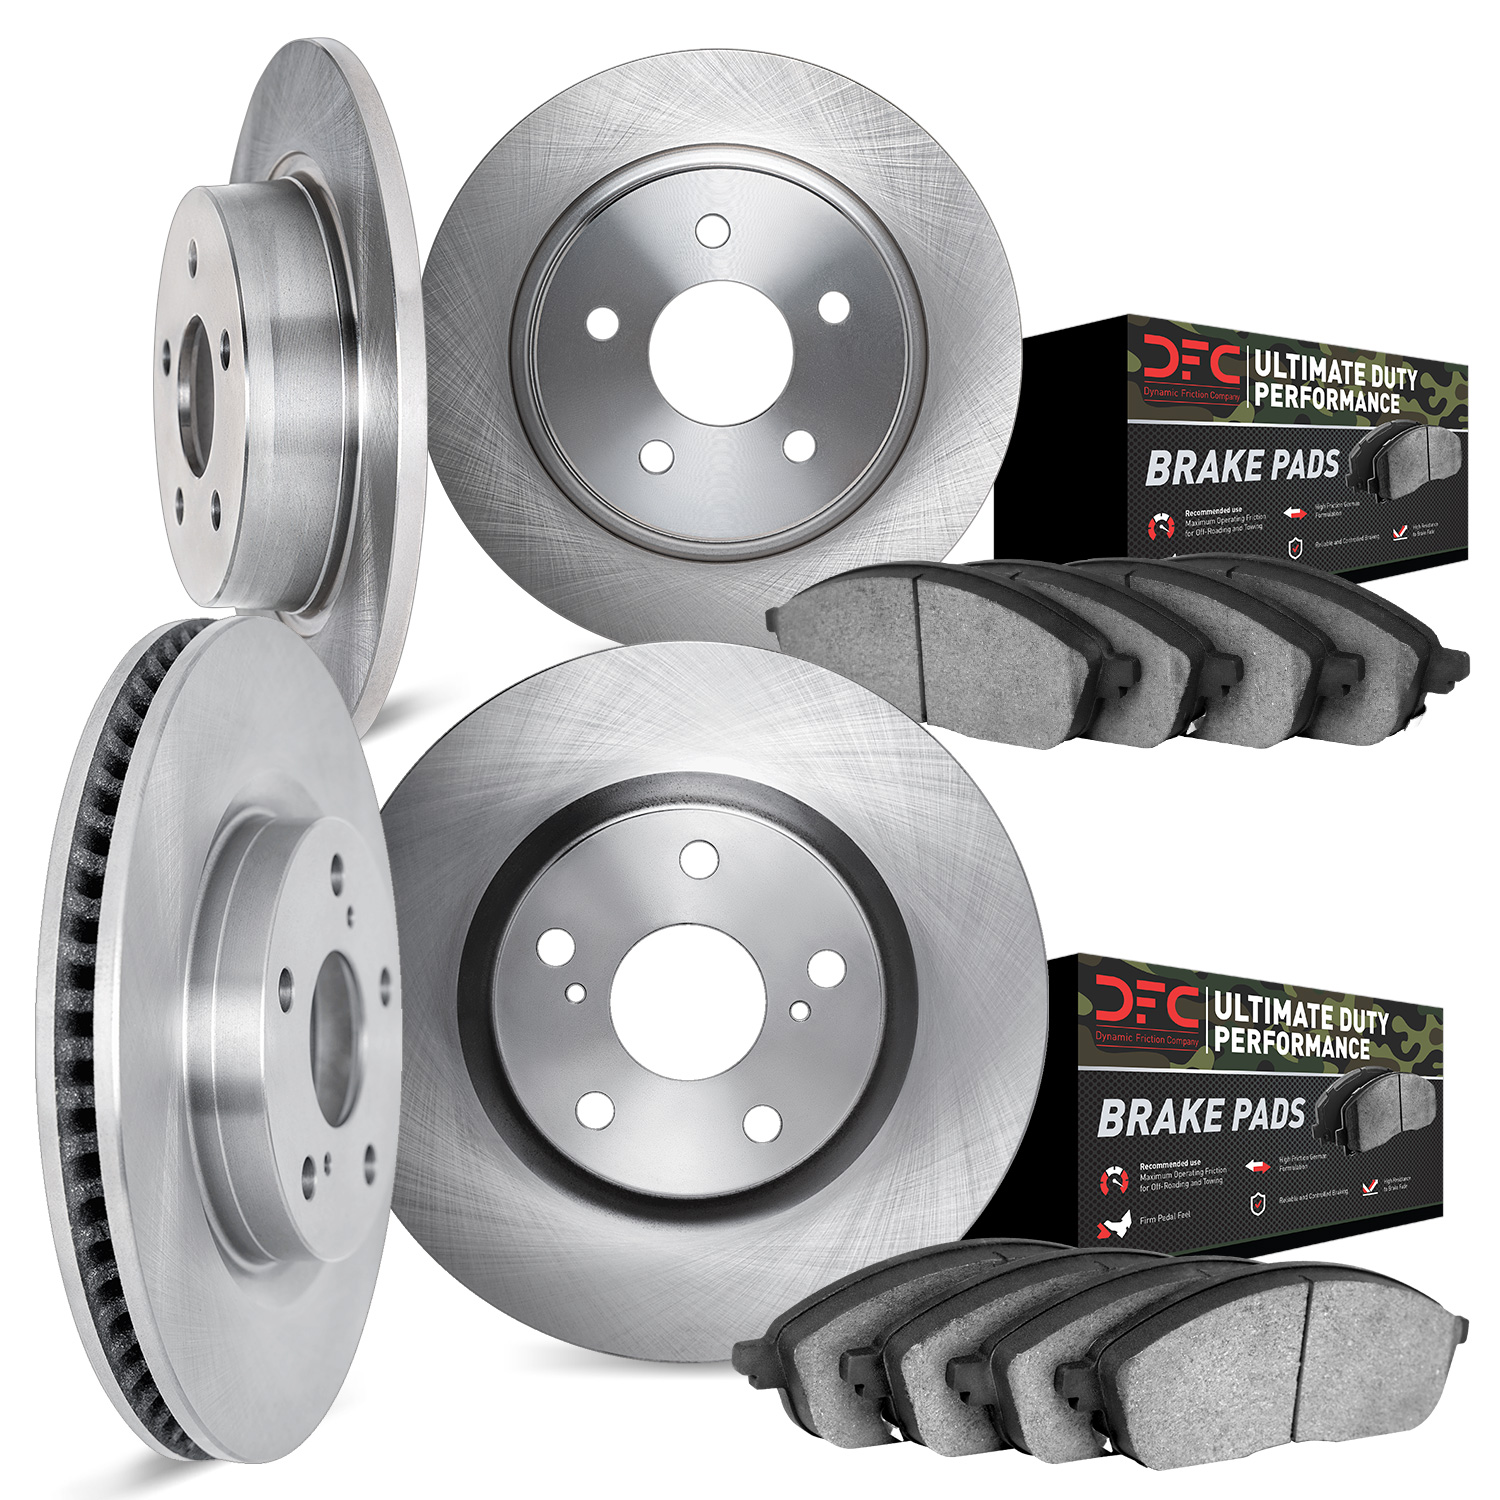 6404-42056 Brake Rotors with Ultimate-Duty Brake Pads, Fits Select Mopar, Position: Front and Rear